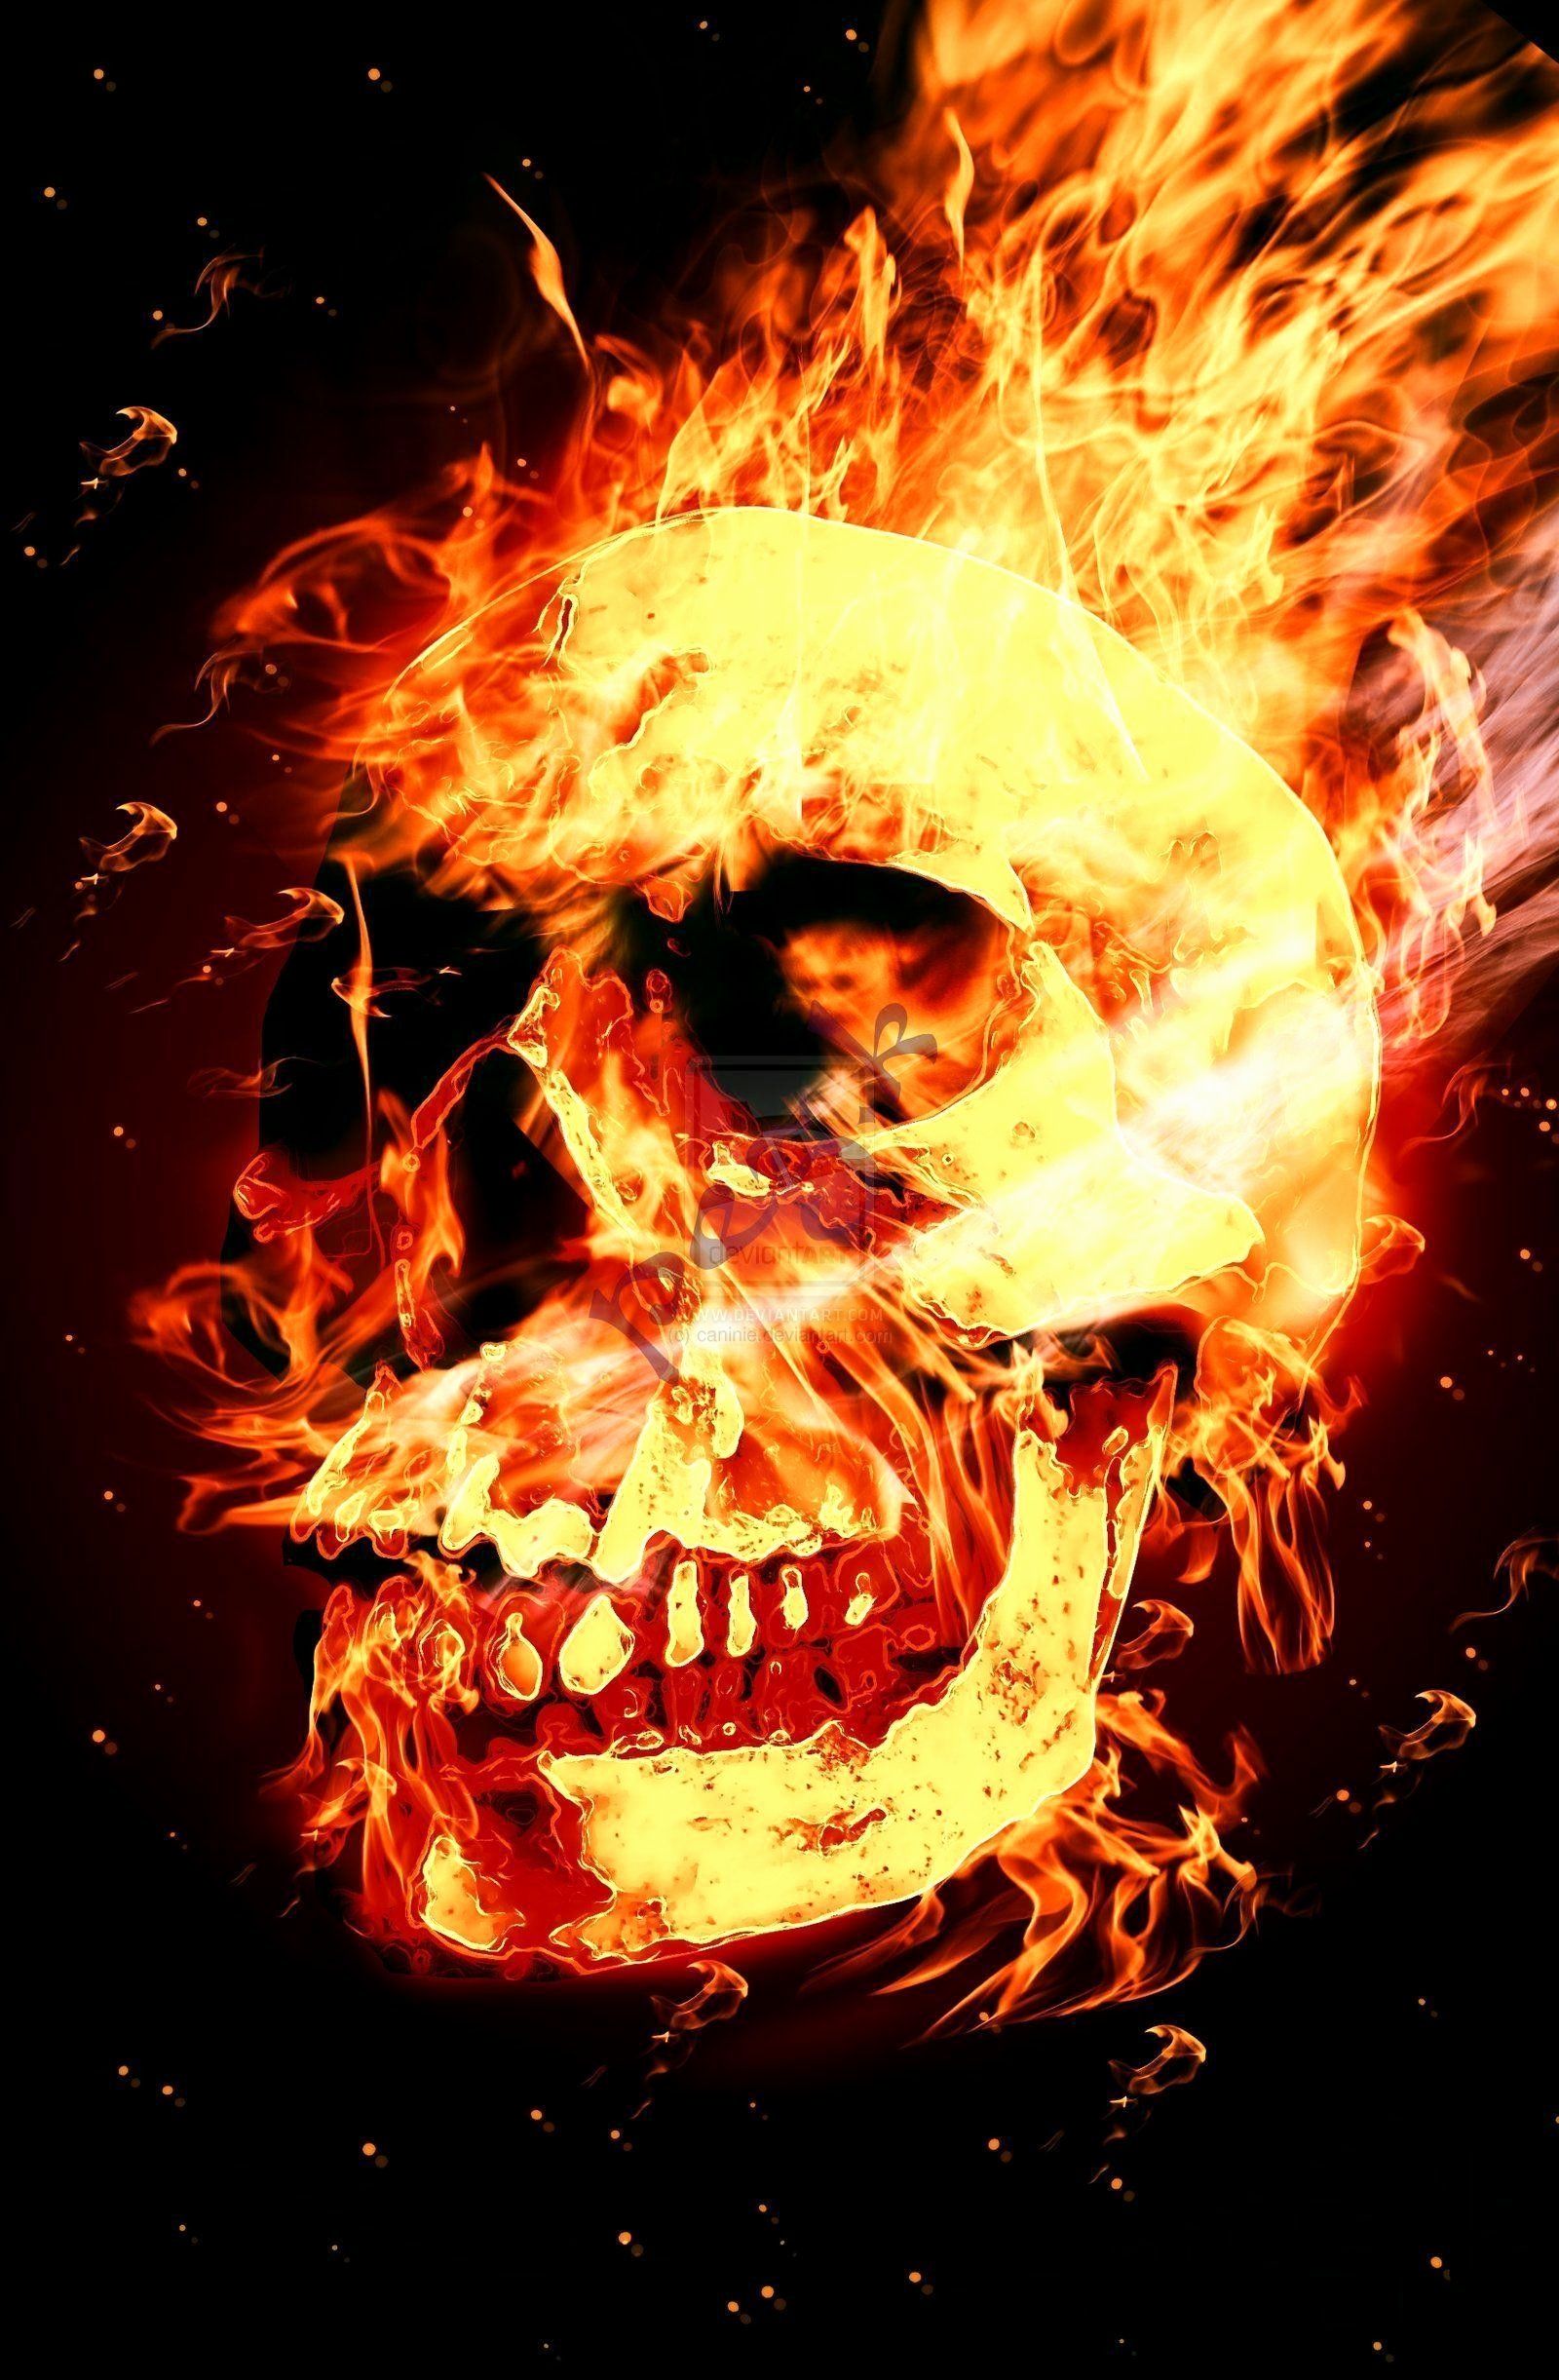 Awesome Fire Skull Wallpaper Ideas of The Hudson